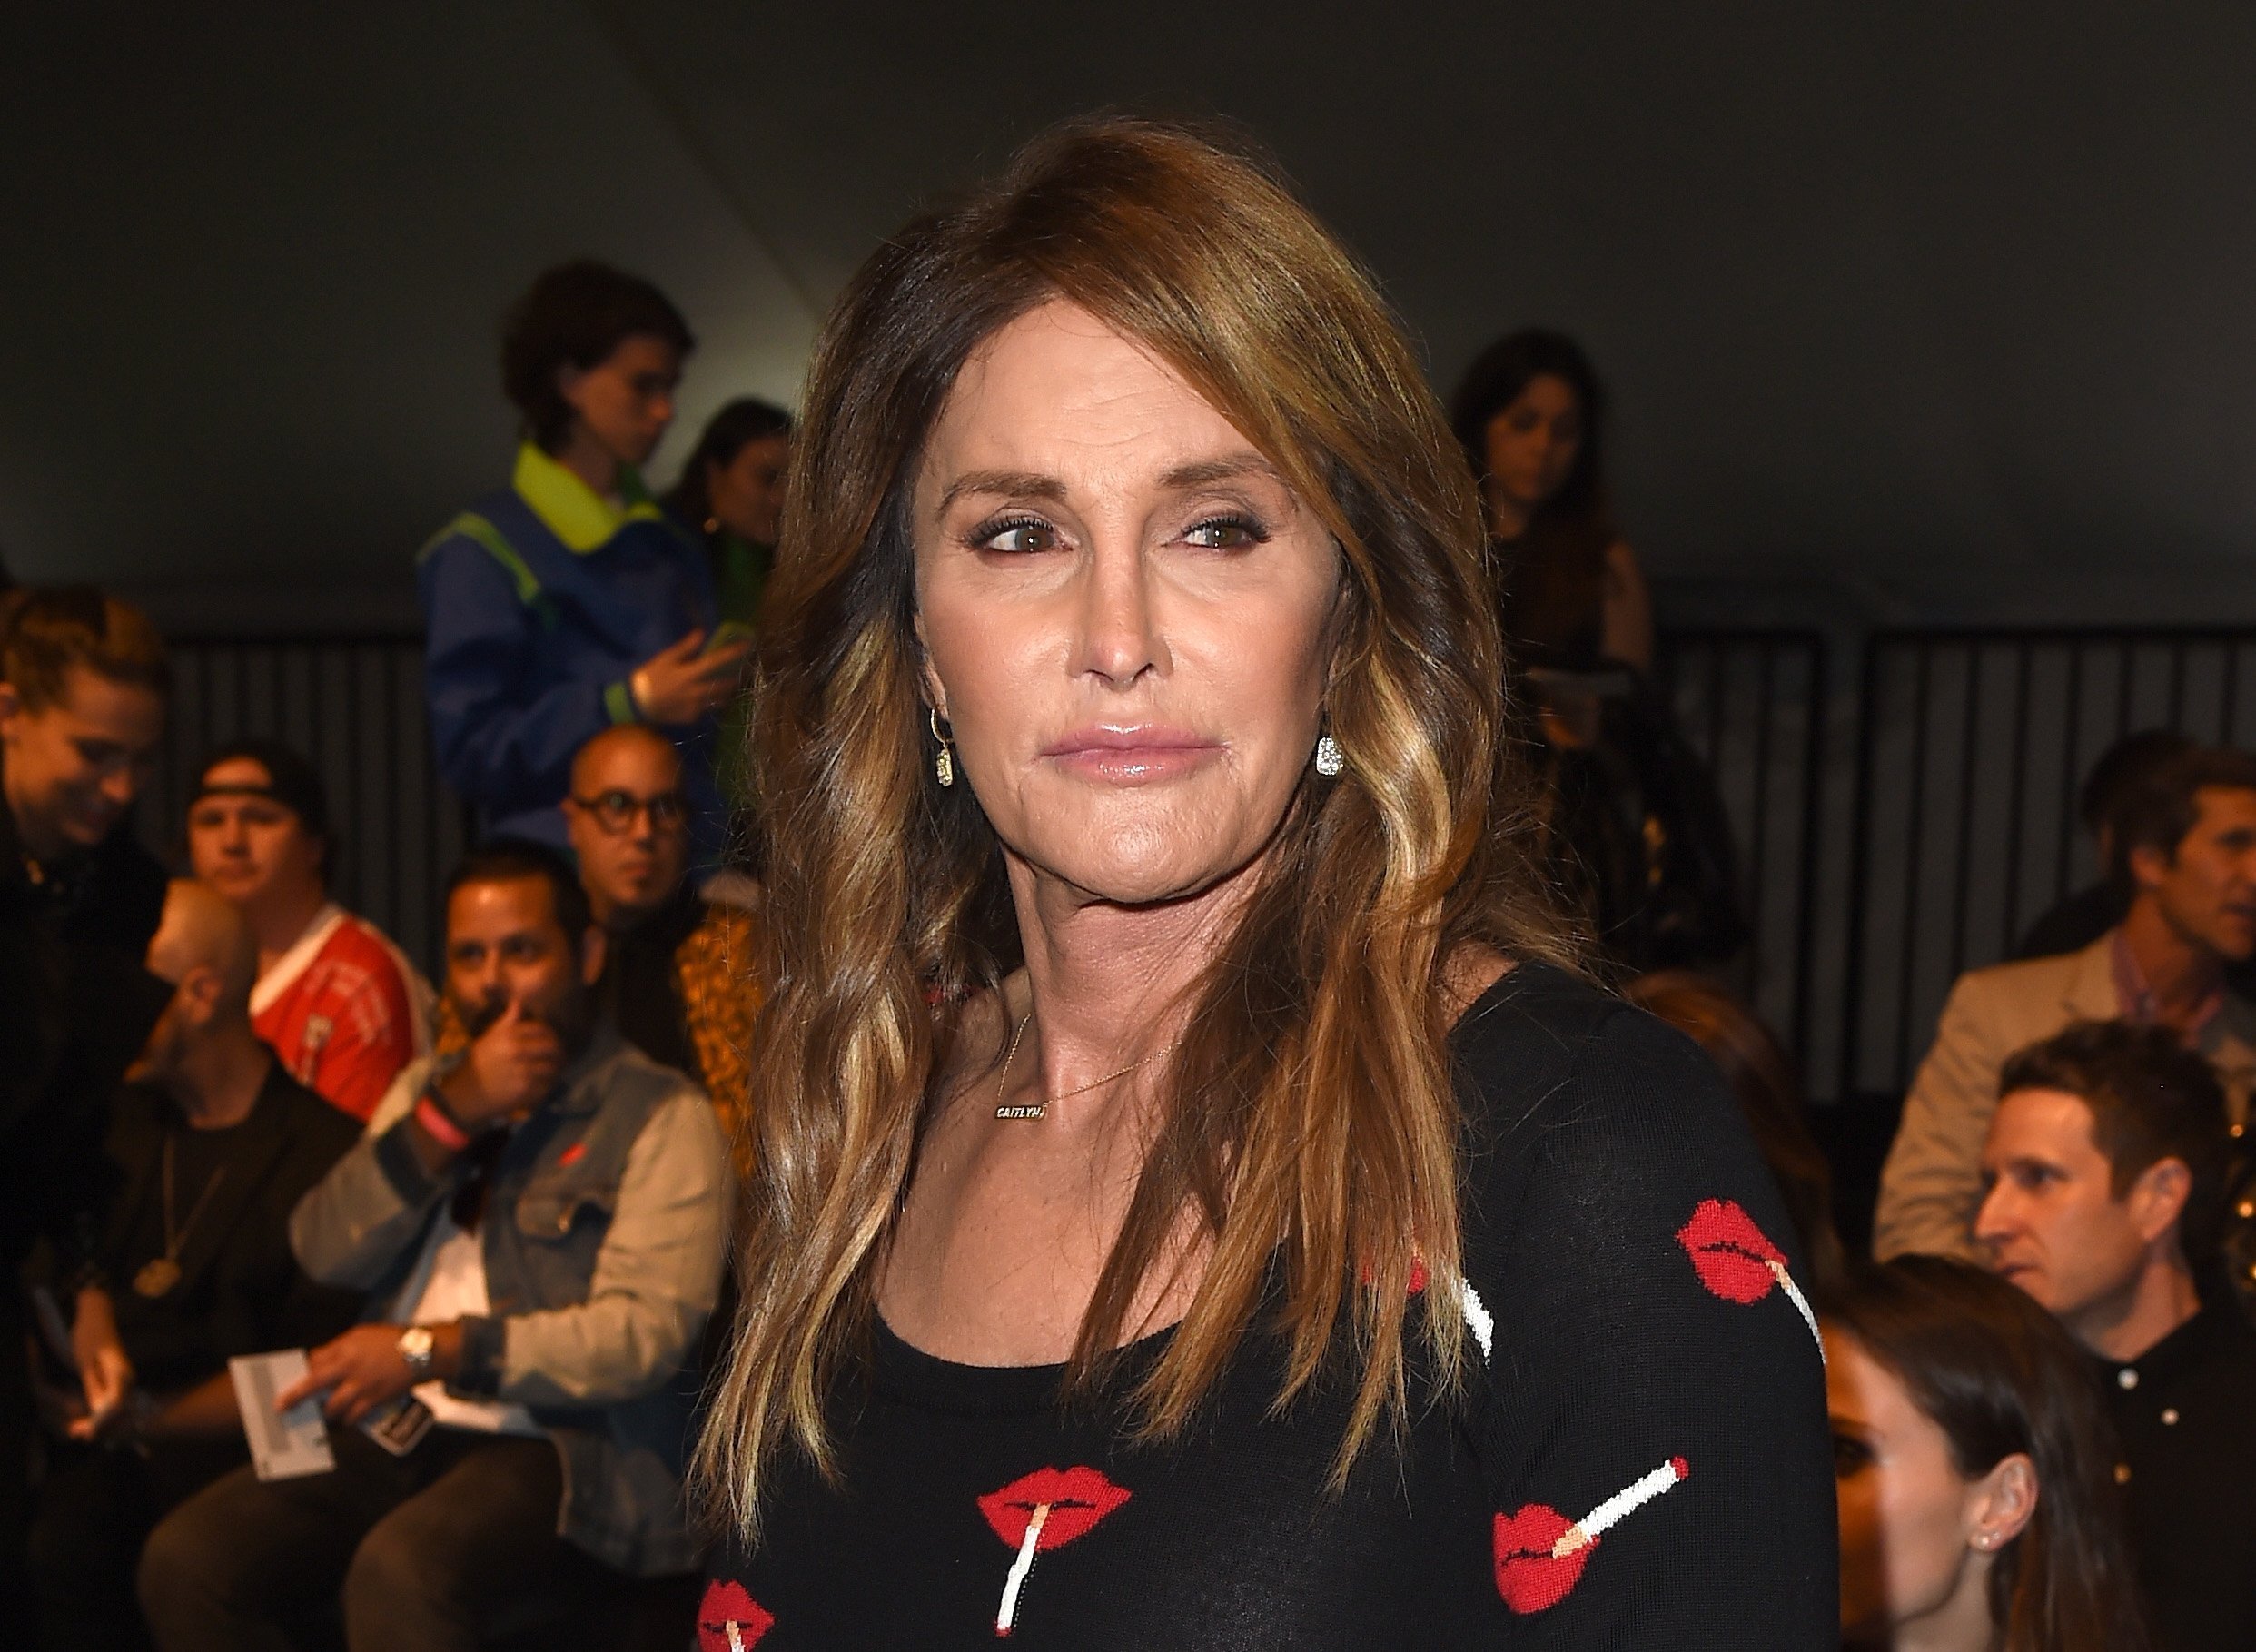 Caitlyn Jenner attends the Moschino Spring/Summer 17 Menswear and Women's Resort Collection during MADE LA on June 10, 2016 | Photo: GettyImages